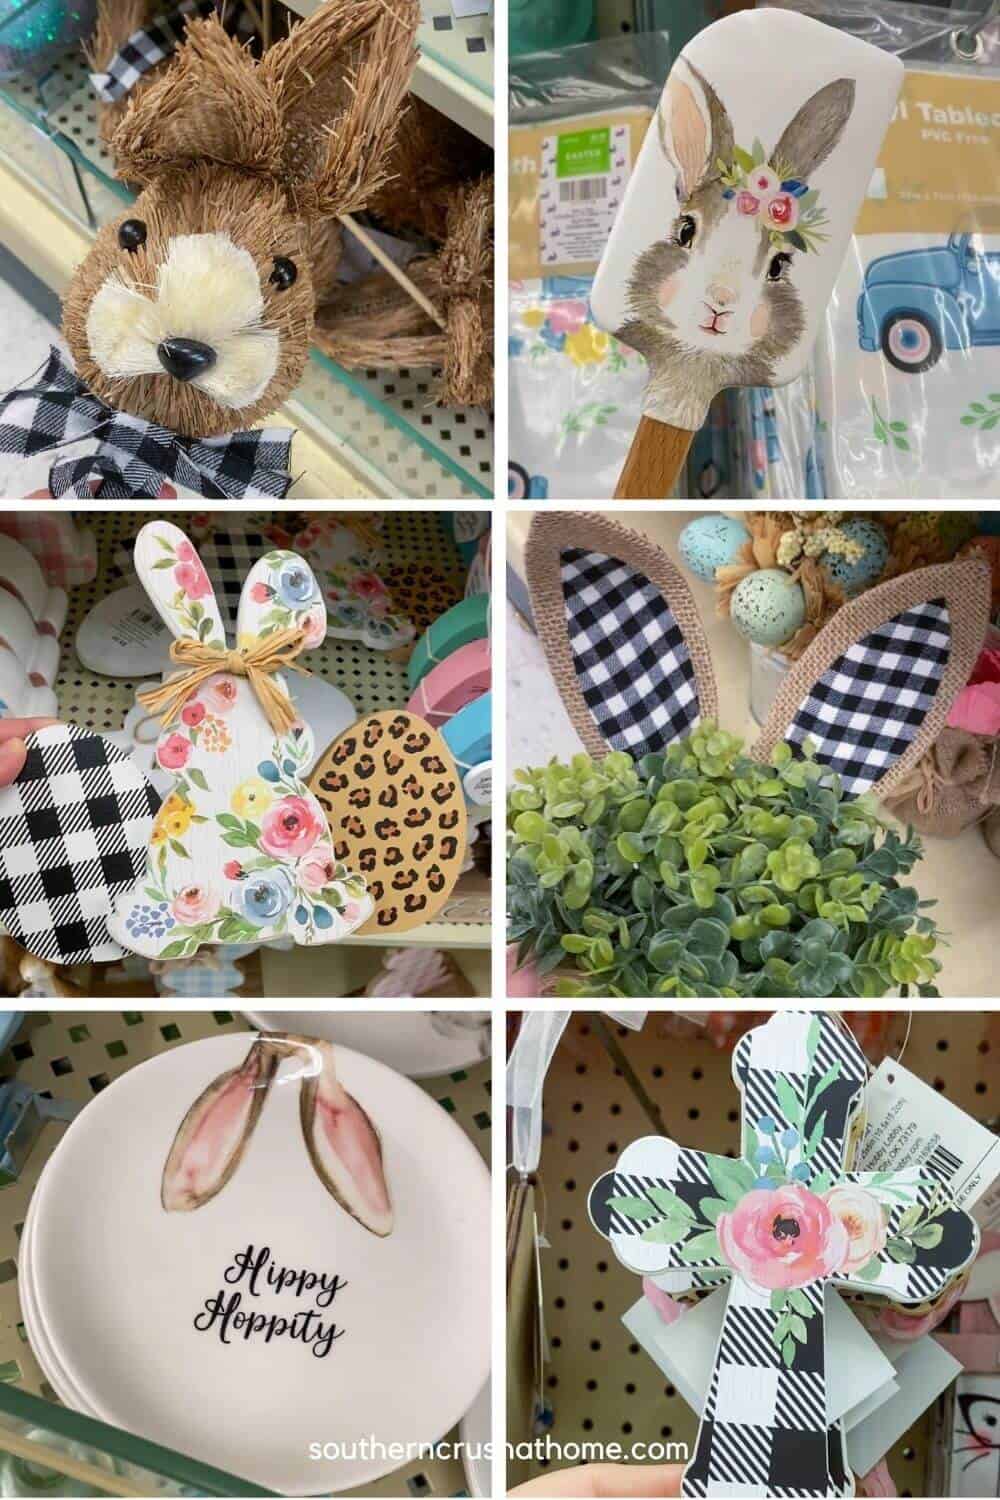 Paper Craft Creations: Chalk Couture Build A Bunny Home Decor